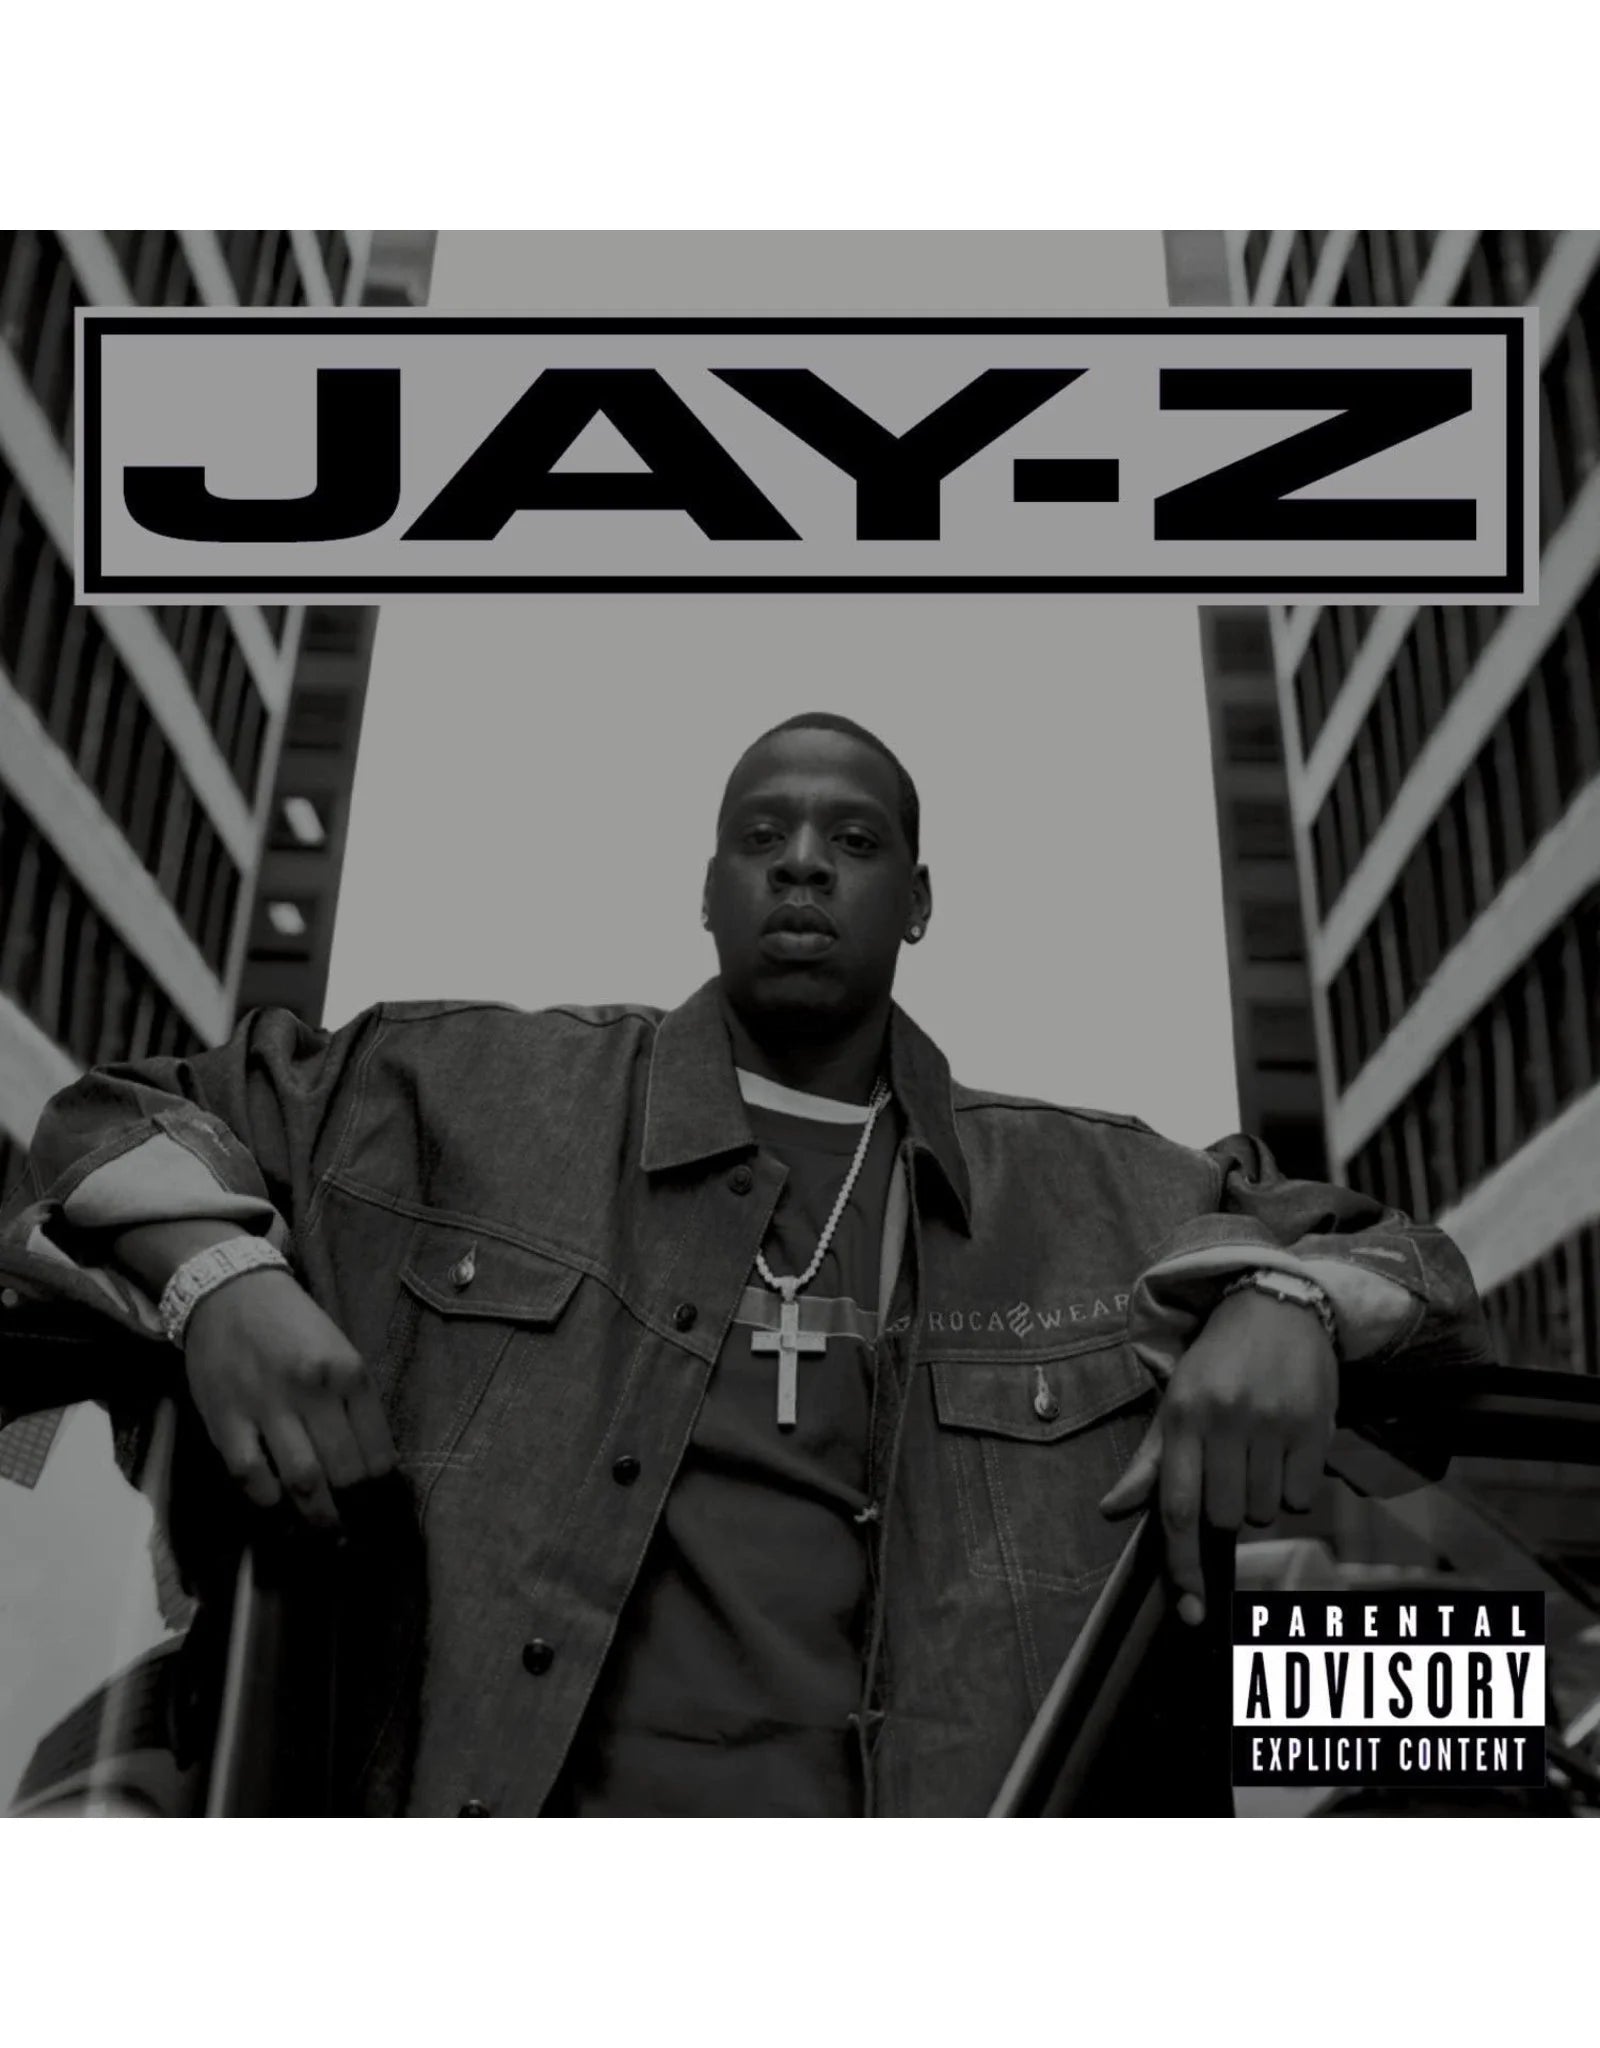 Jay-Z - Volume 3: Life & Times of S Carter